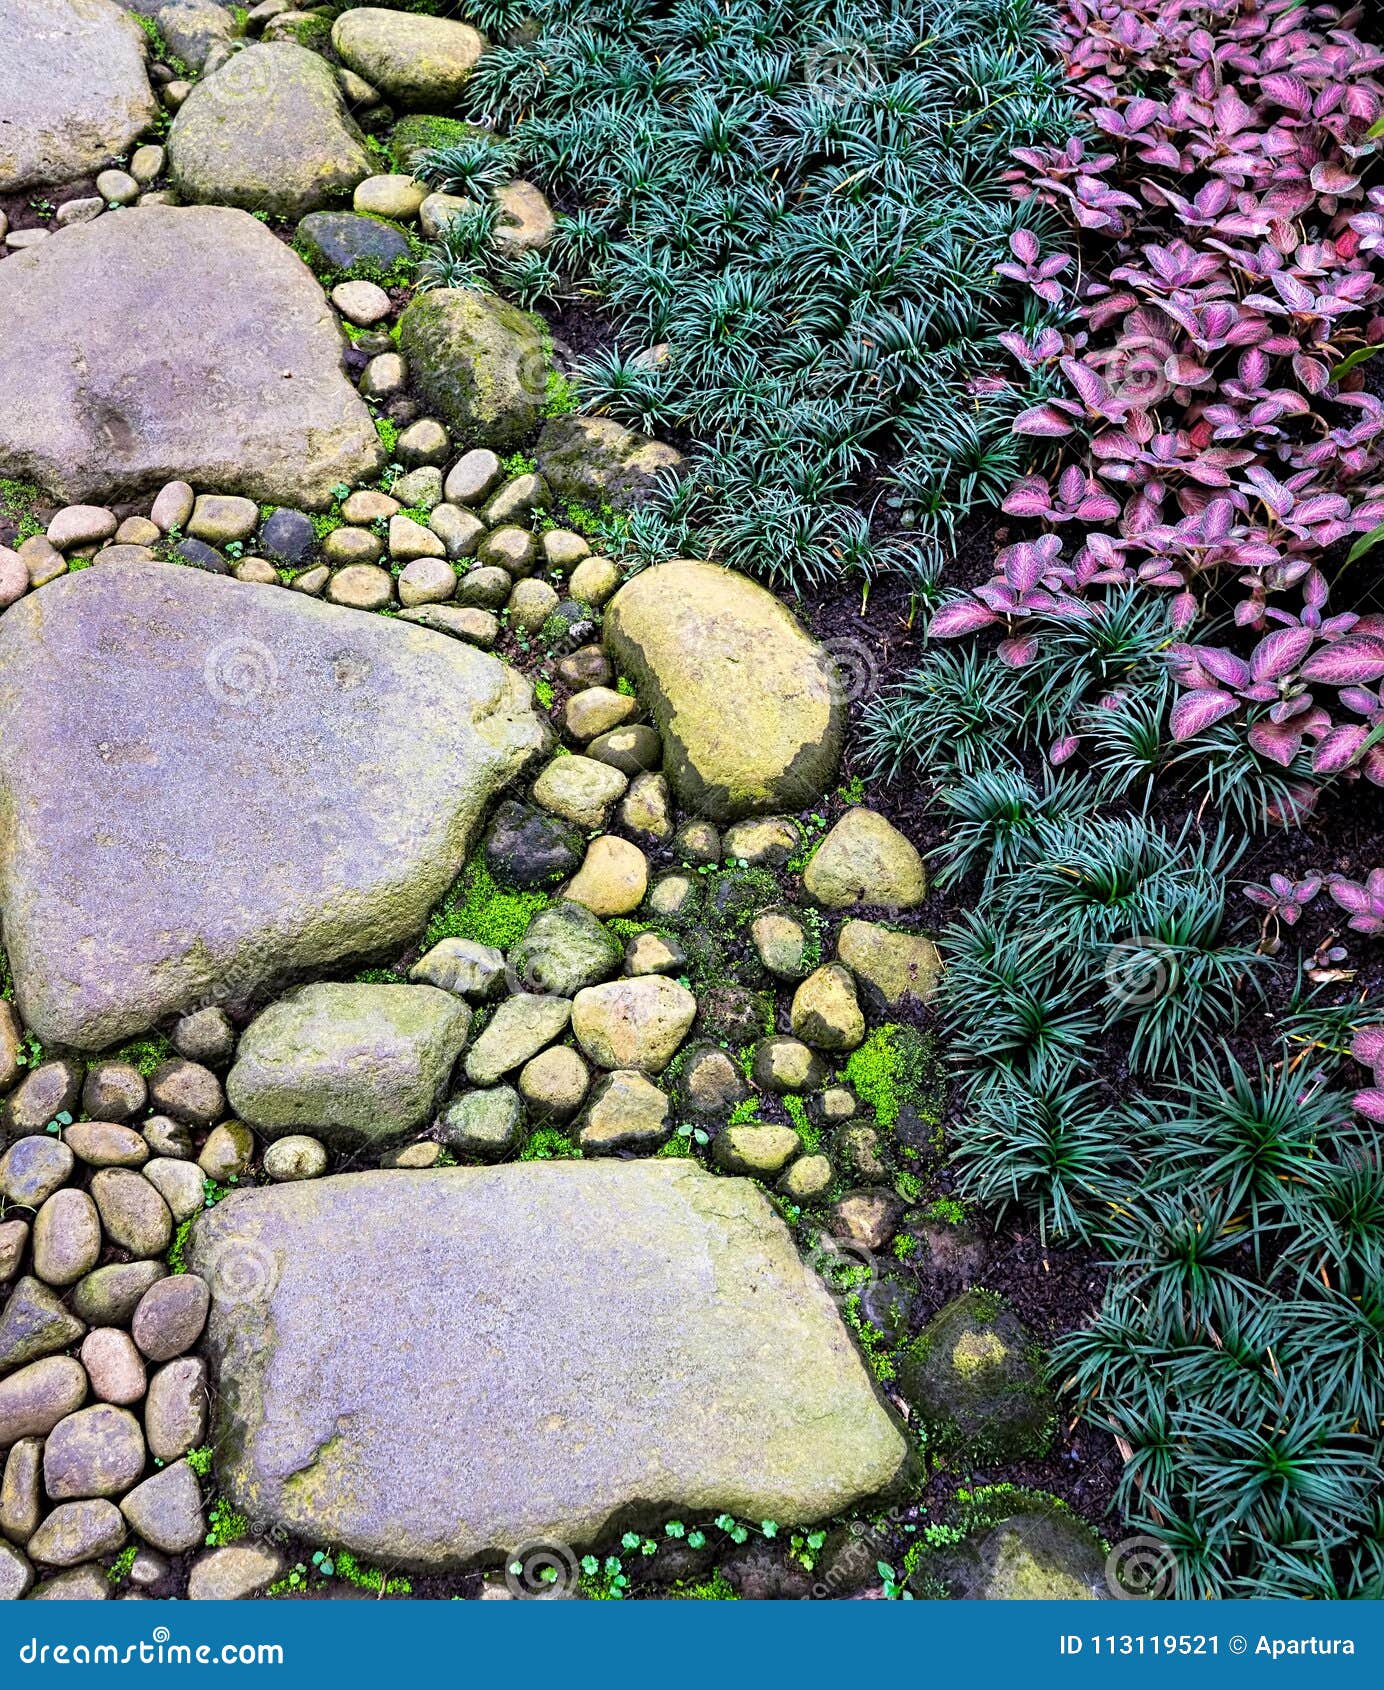 stone gravel foot path on zen garden with mondo grass and ornamental flame violet plant.